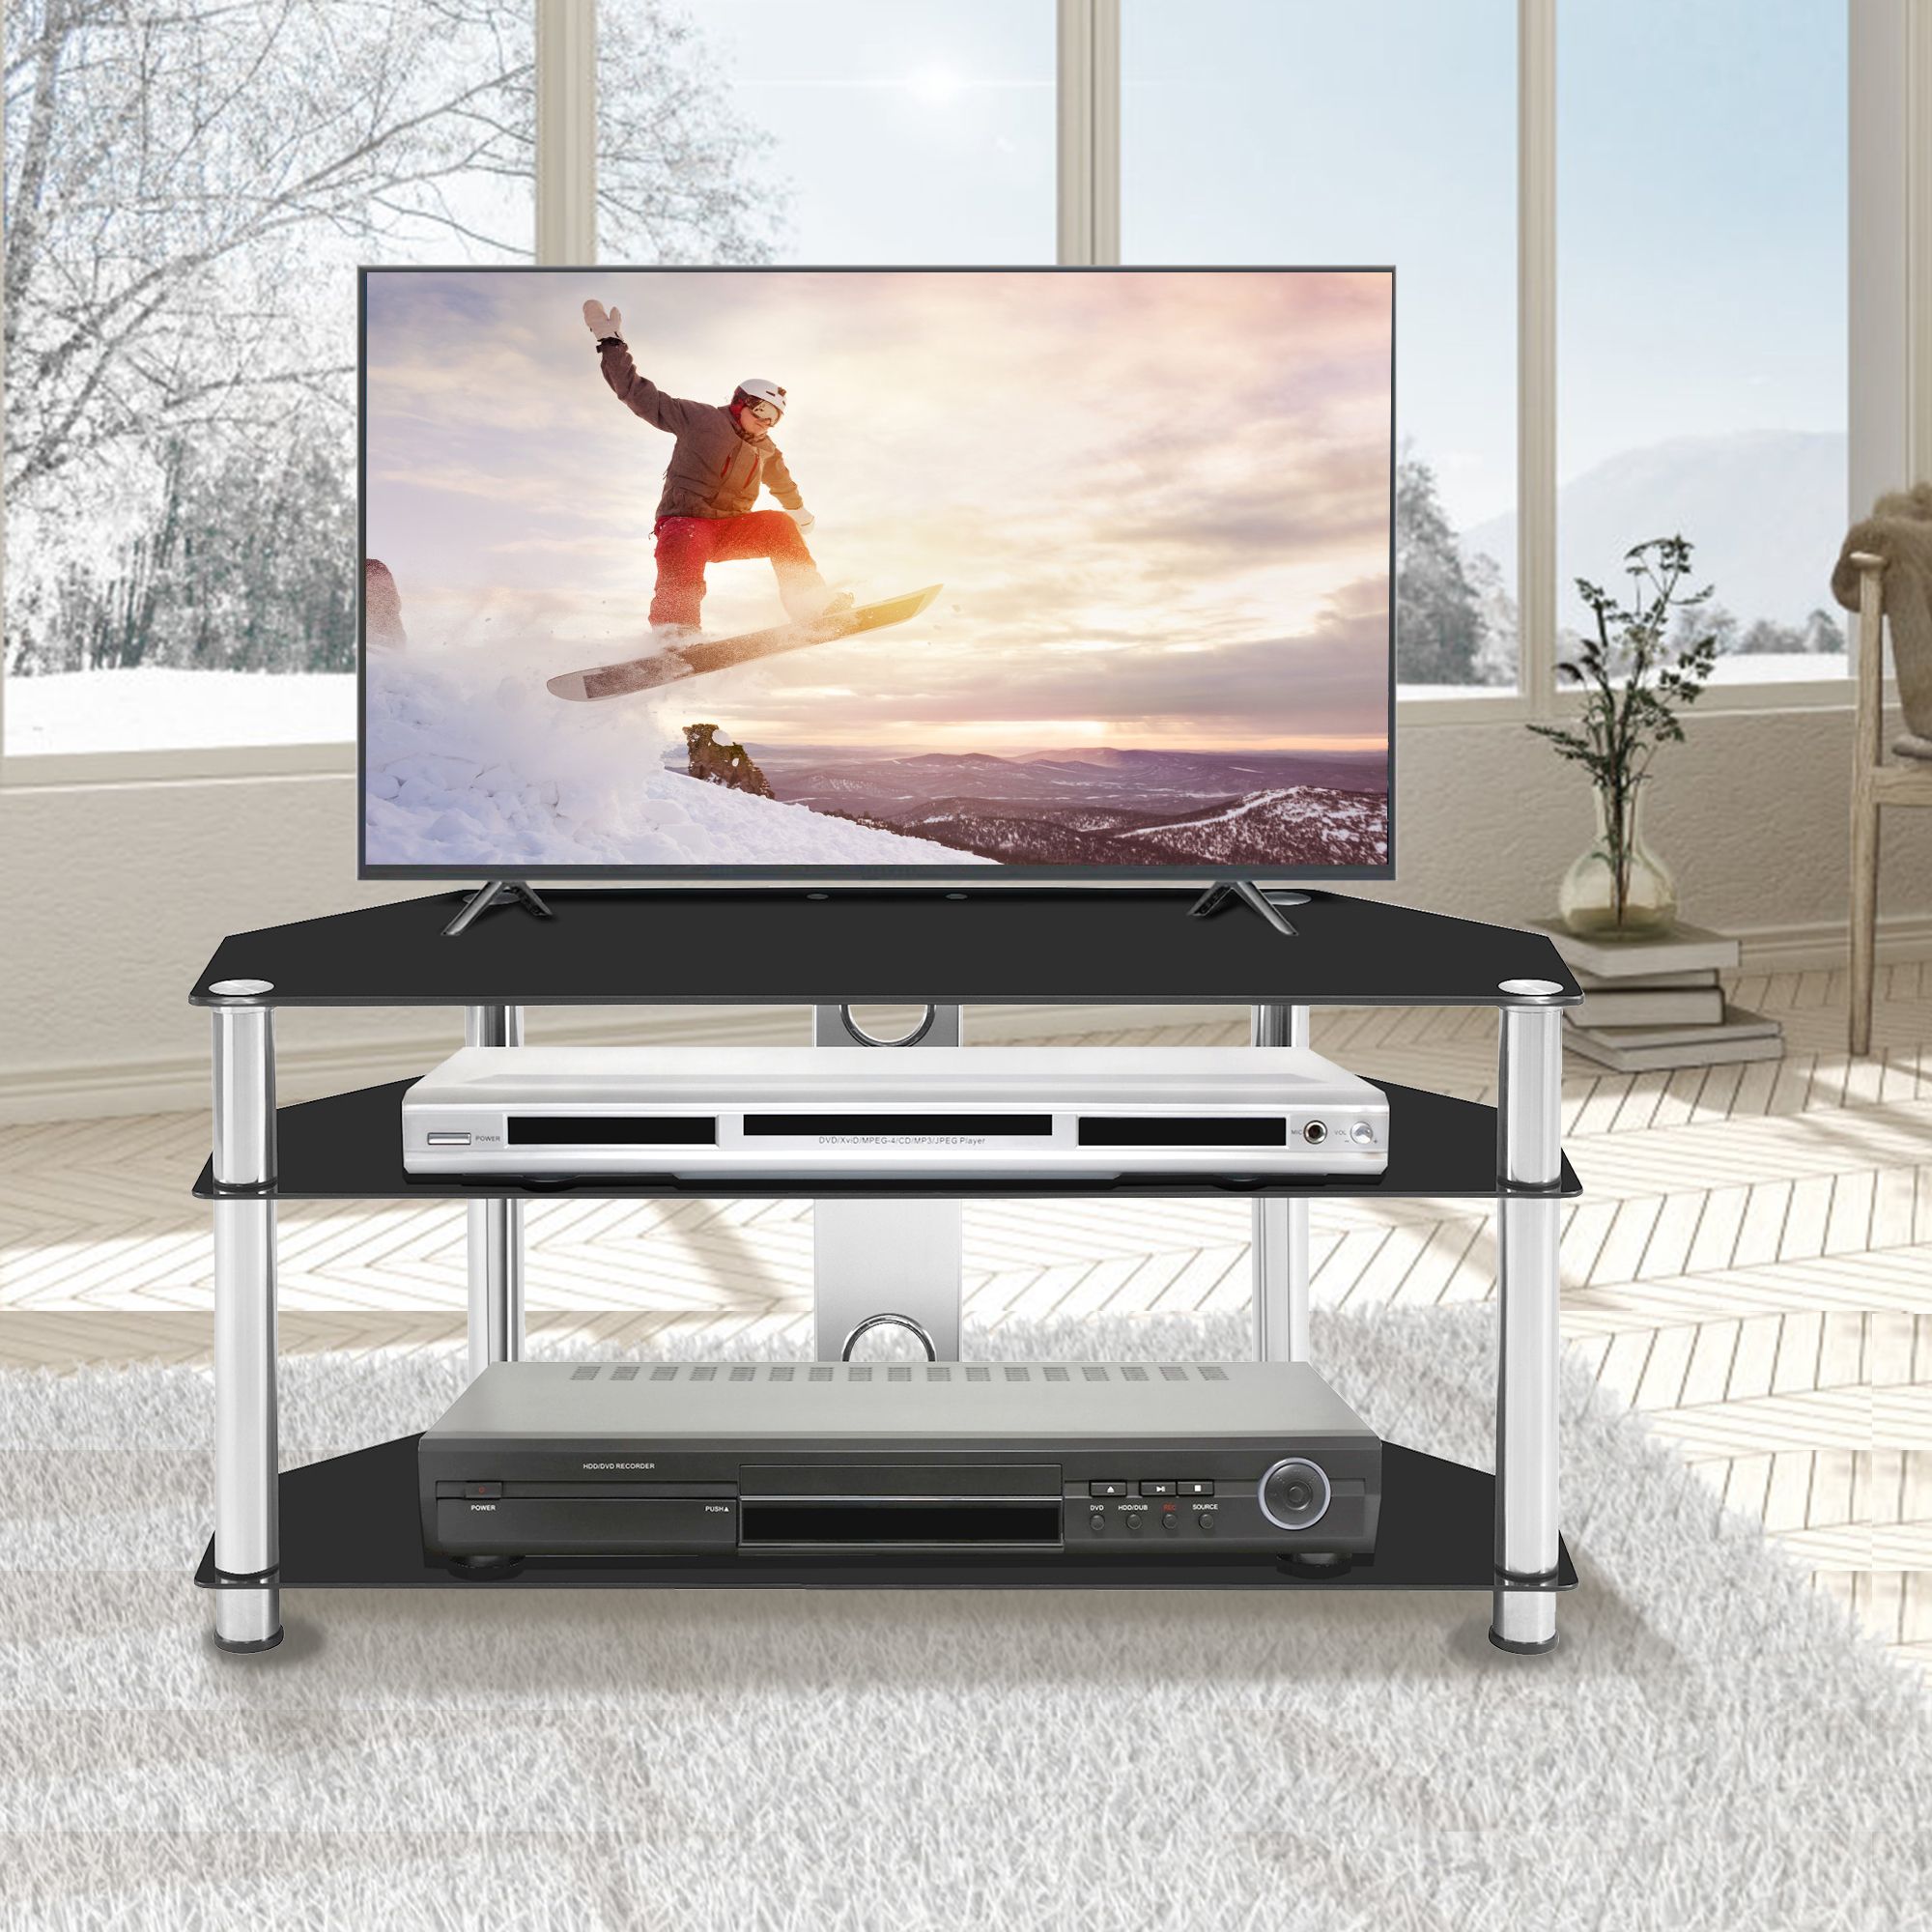 3 Tier Floor Modern Tv Stand For Most 26 42inch Tvs Within Contemporary Black Tv Stands Corner Glass Shelf (View 13 of 15)